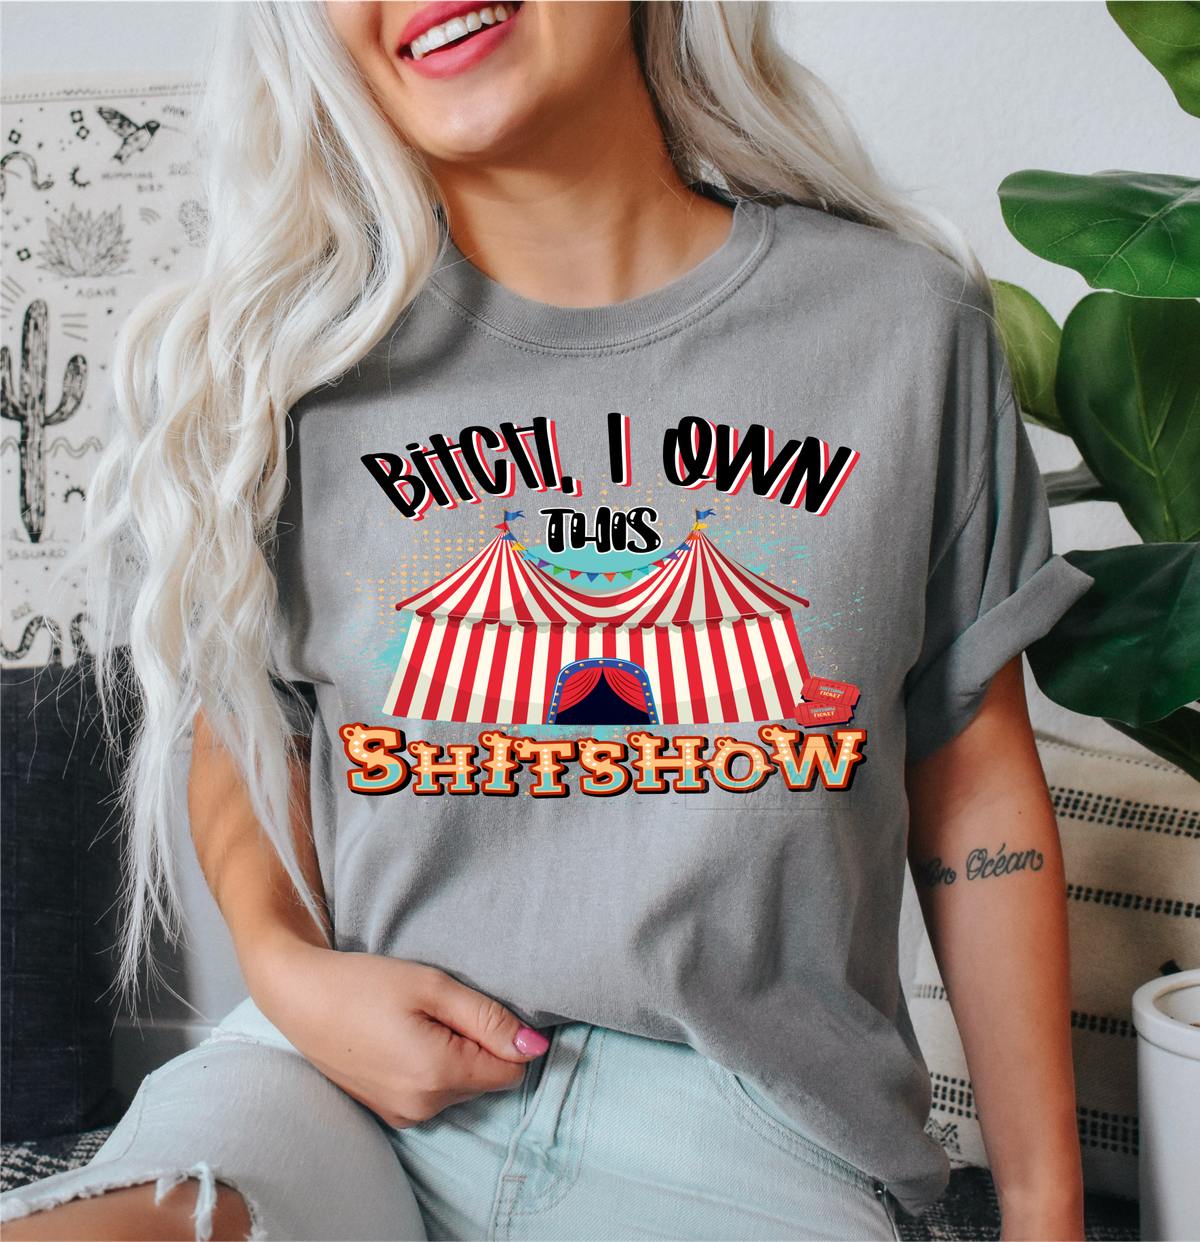 Bitch, I own this shitshow Cricus clowns  size ADULT  DTF TRANSFERPRINT TO ORDER